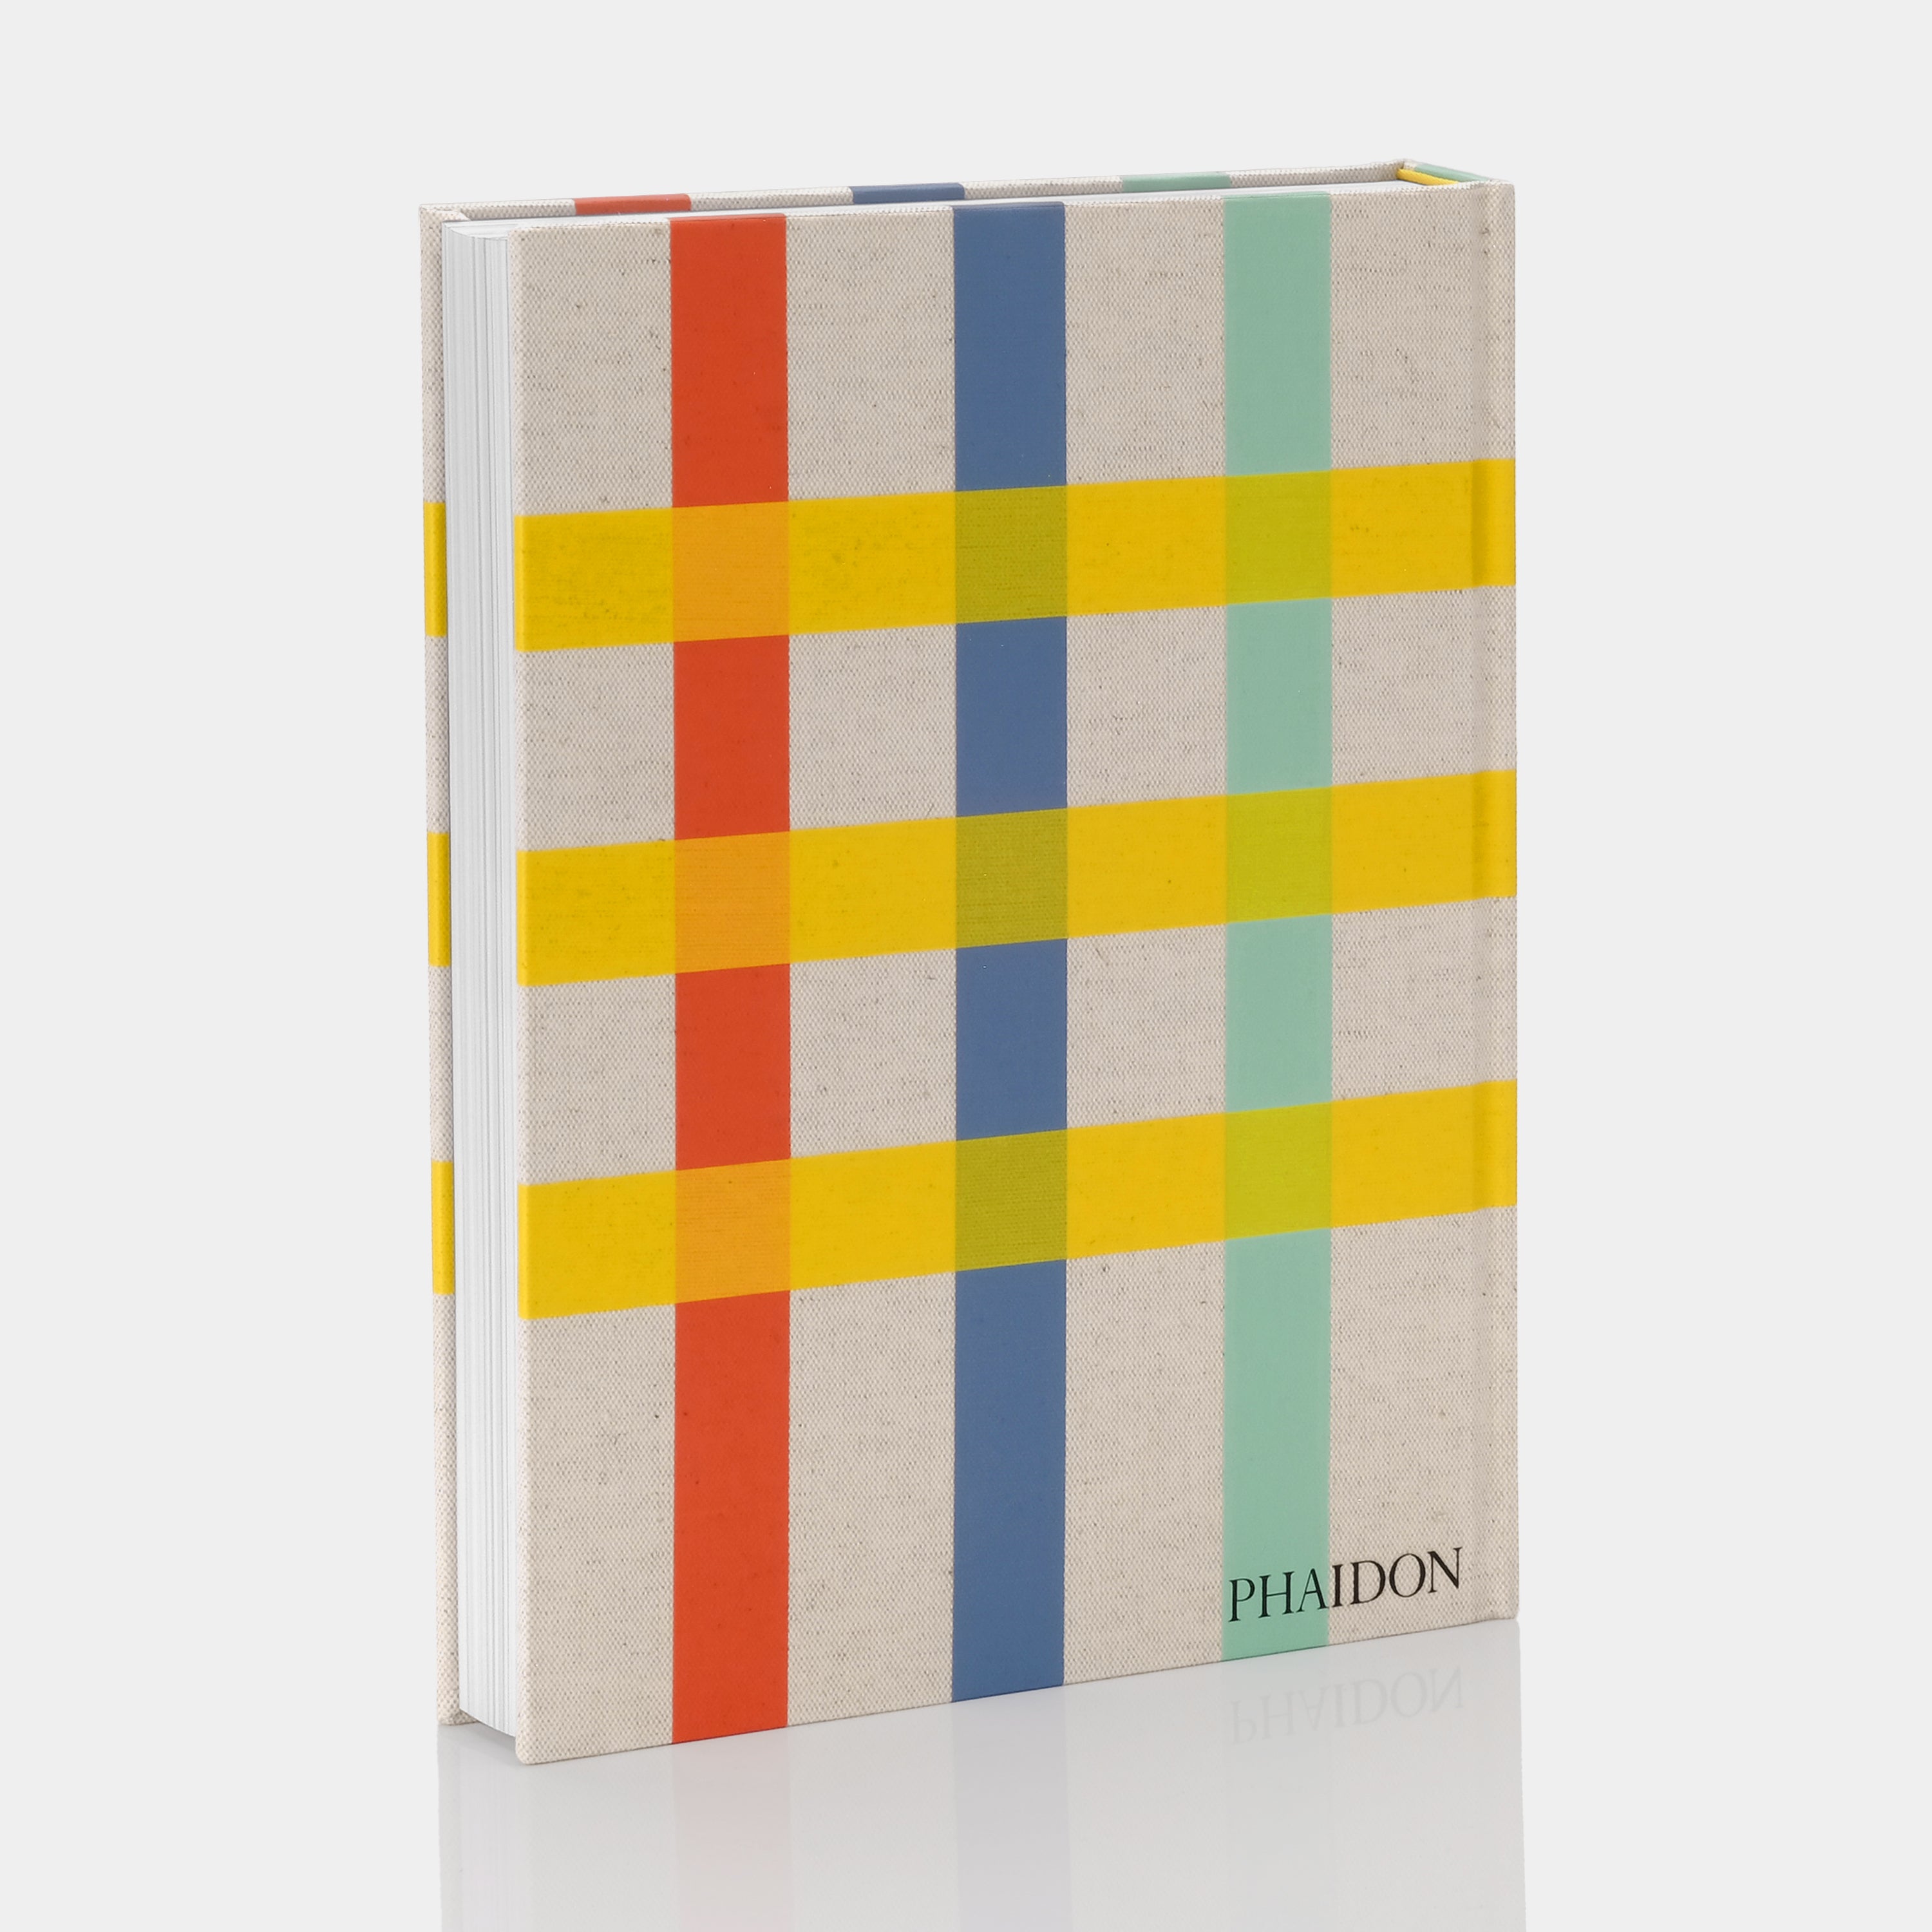 Anni & Josef Albers: Equal and Unequal Phaidon Book